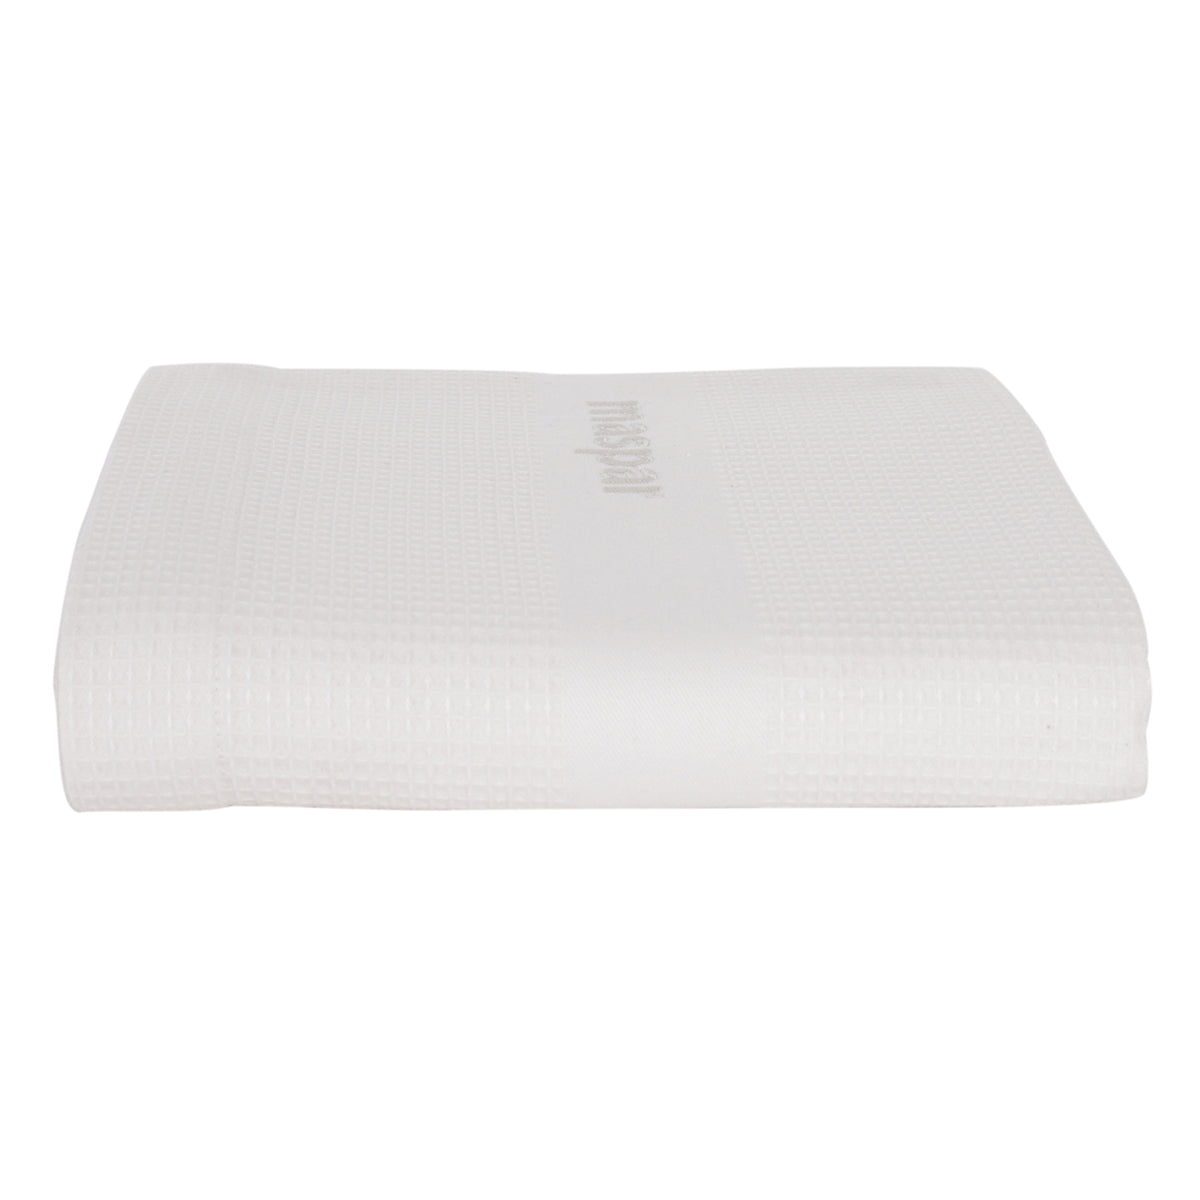 Catalina Waffle Antimicrobial Antifungal Super Absorbent Quick Dry Gym/Travel White Towel